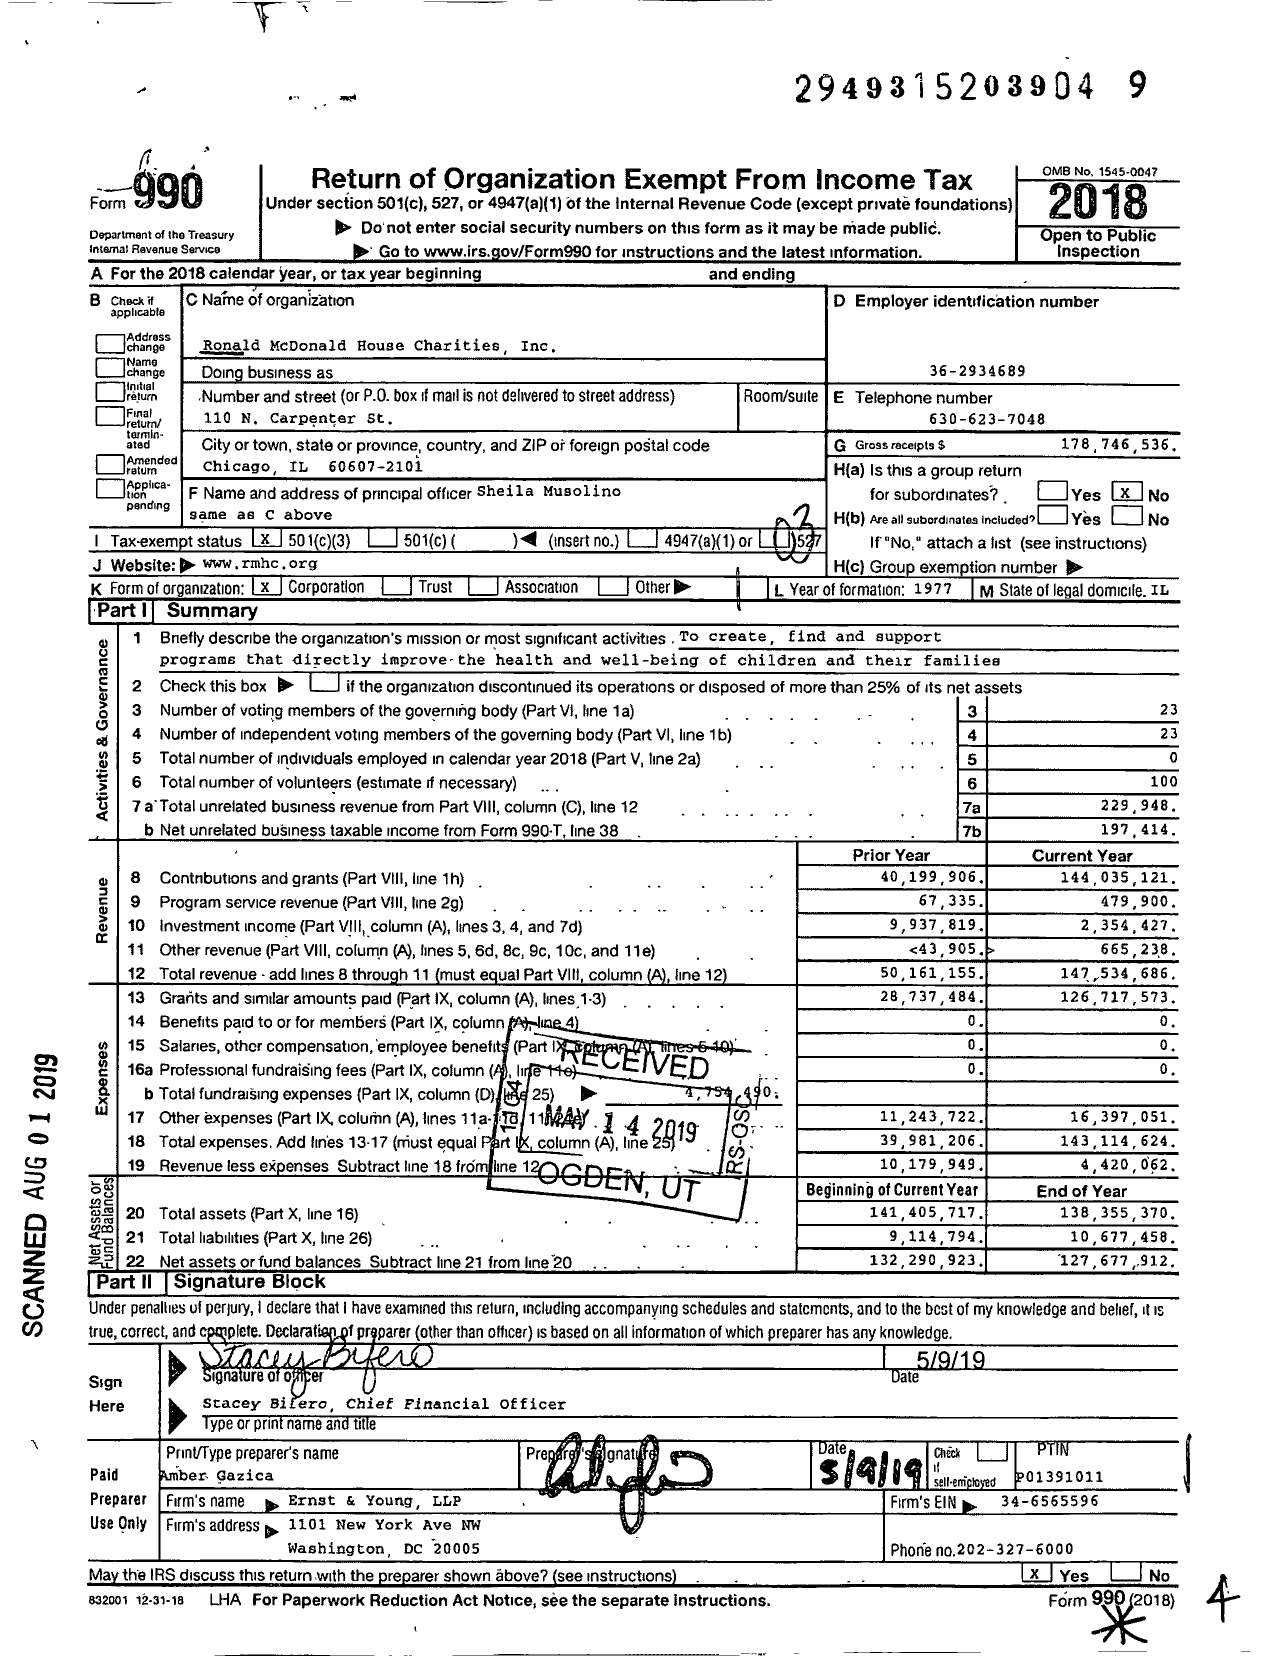 Image of first page of 2018 Form 990 for Ronald McDonald House Charities (RMHC)